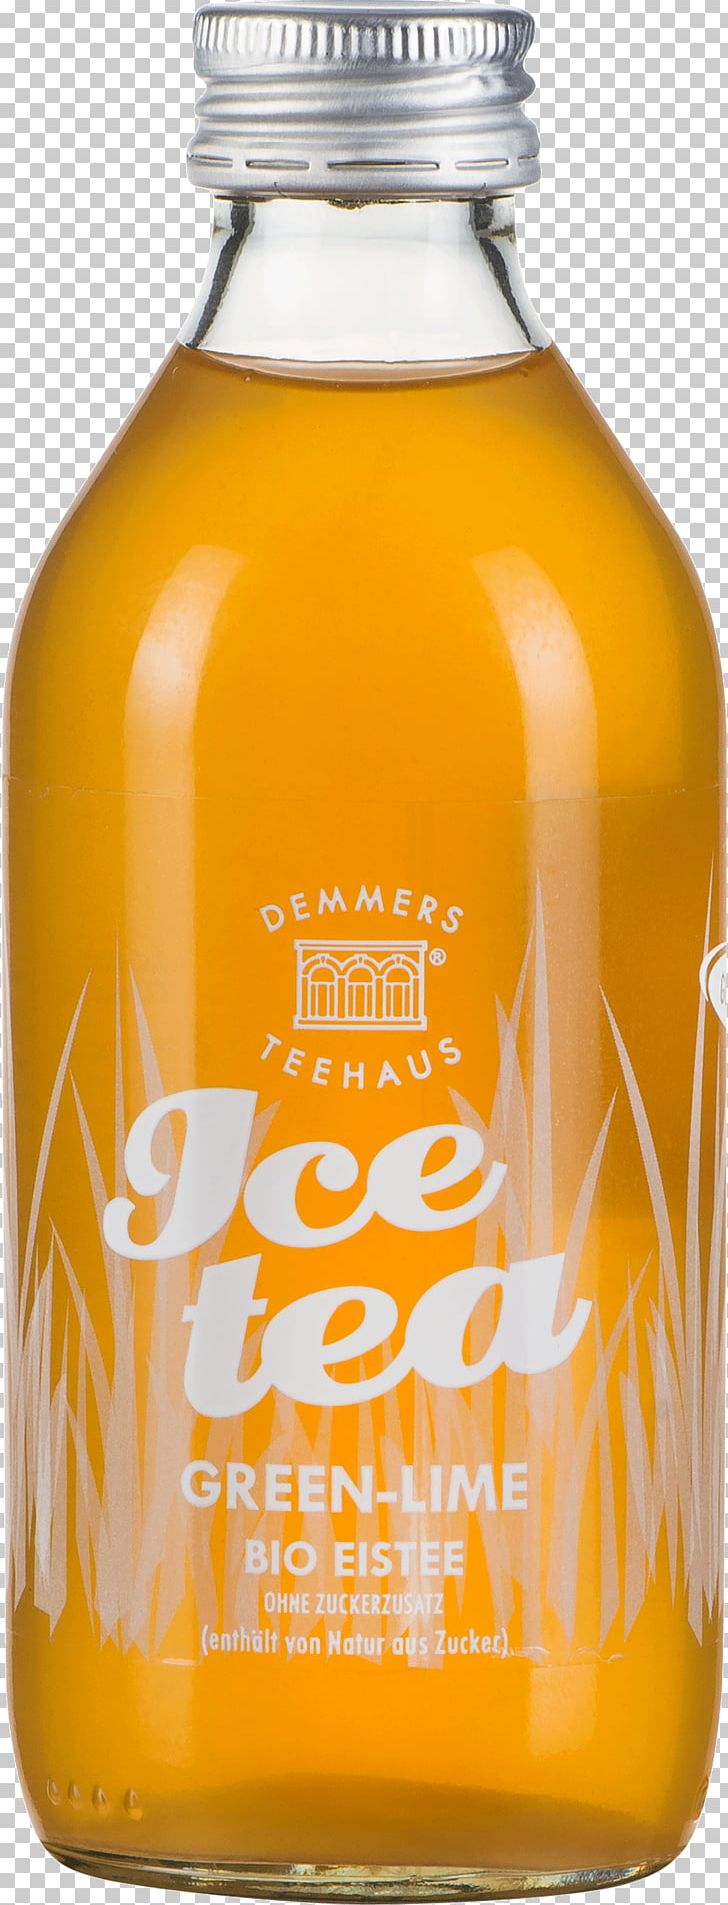 Iced Tea Matcha Fizzy Drinks Demmers Teehaus PNG, Clipart, Bottle, Commodity, Drink, Fizzy Drinks, Food Drinks Free PNG Download